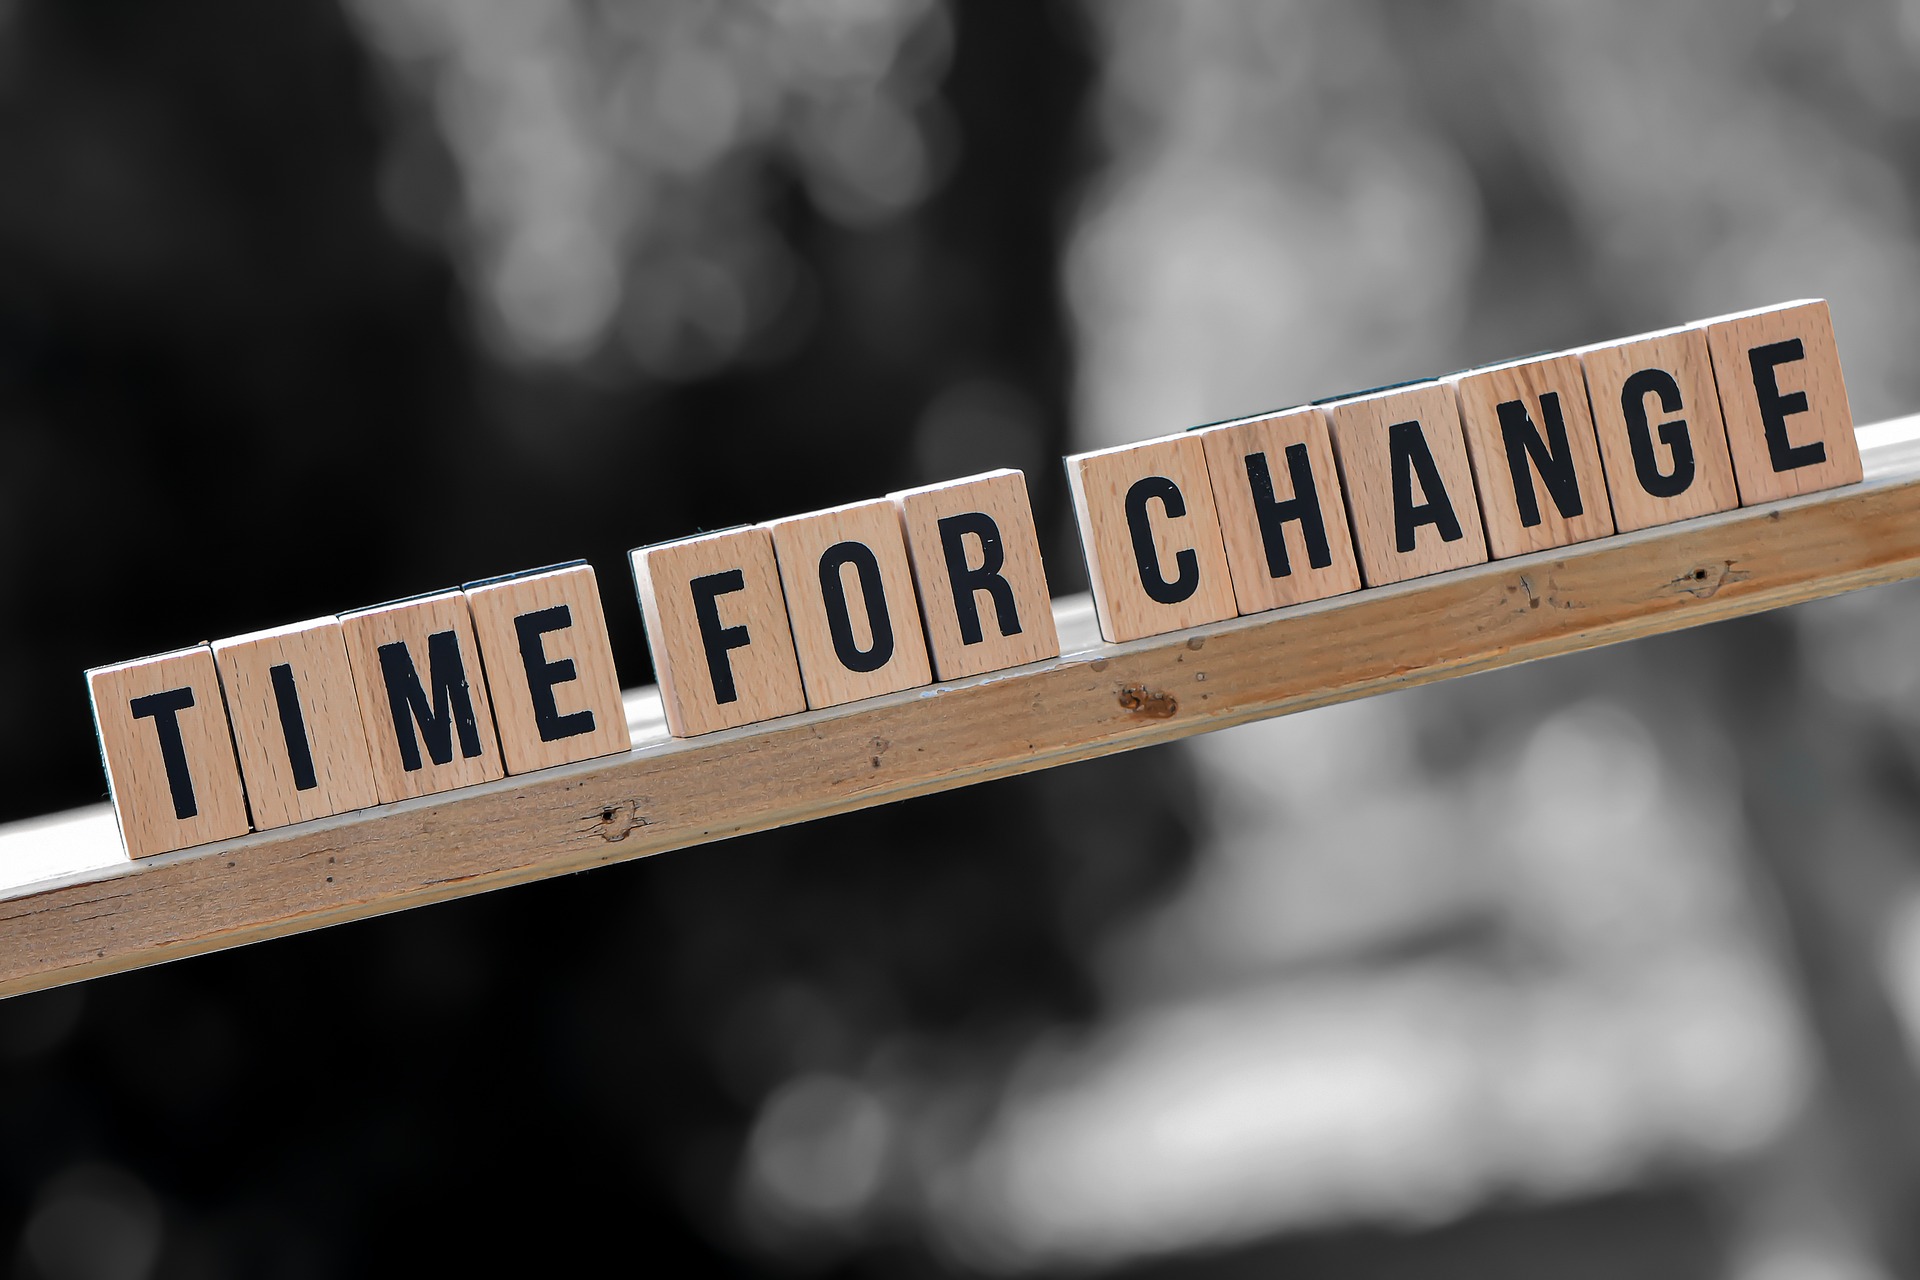 A photo of wooden word tiles spelling out 'time for change' on a wooden surface at an angle, with a blurred black and white background